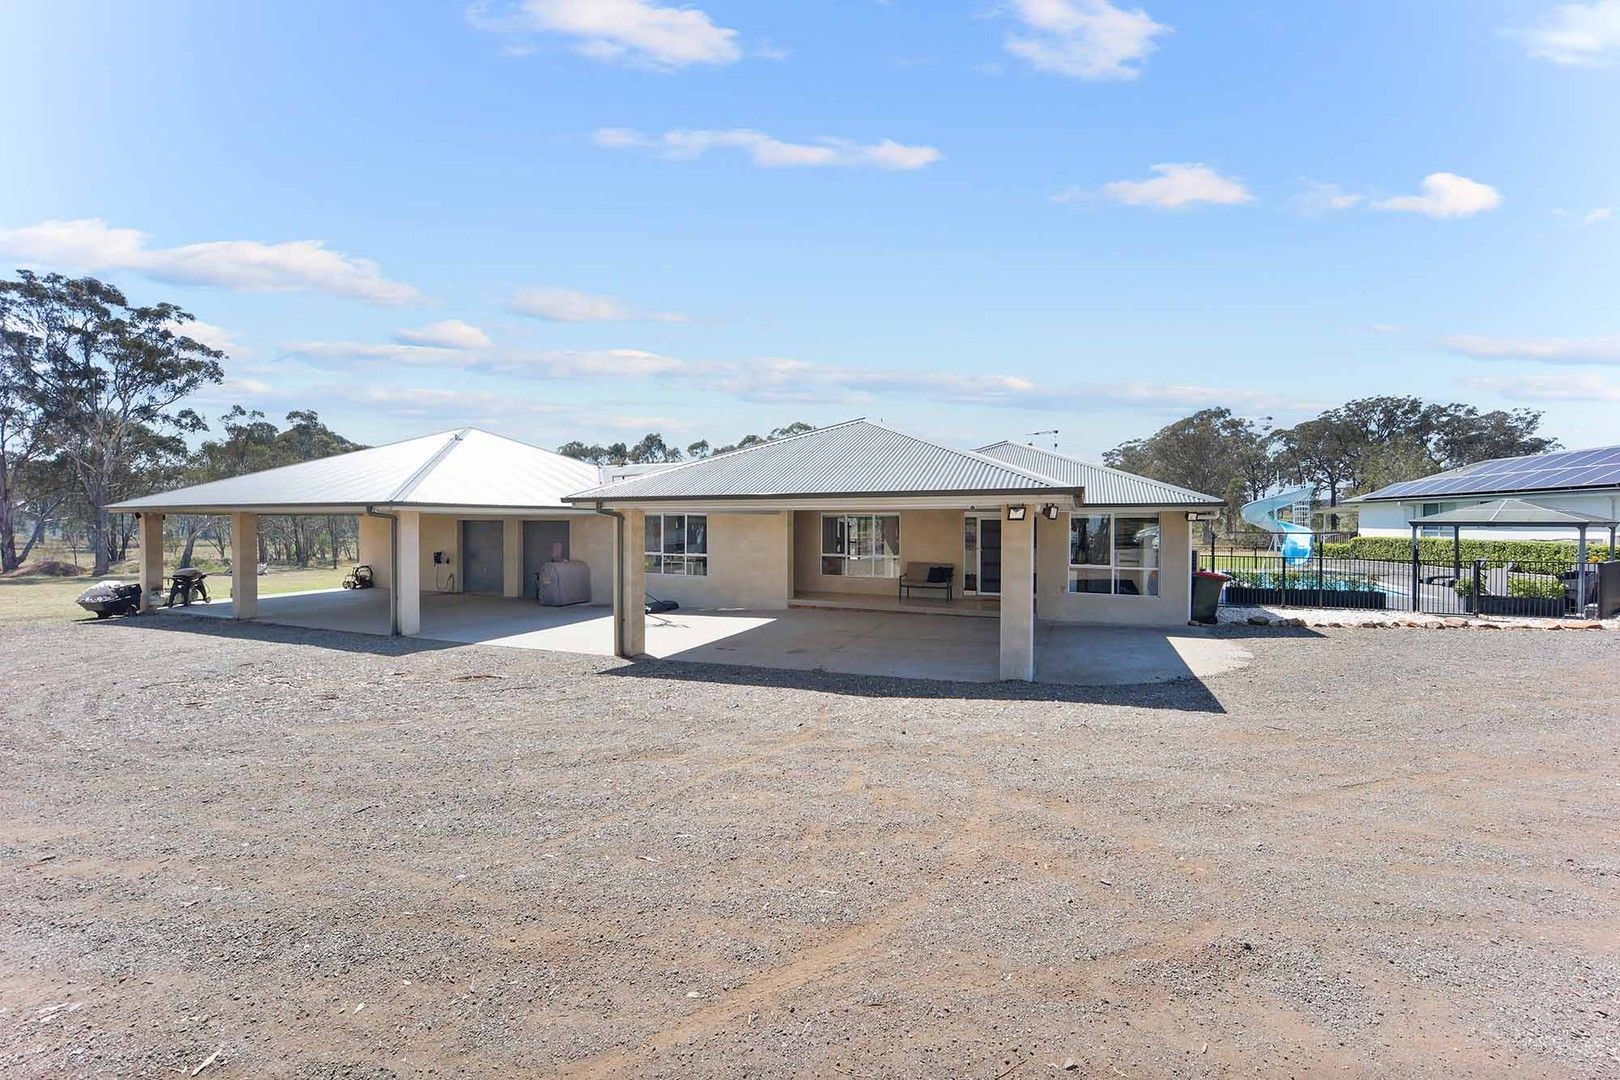 6 bedrooms Acreage / Semi-Rural in 200 Appin Road APPIN NSW, 2560